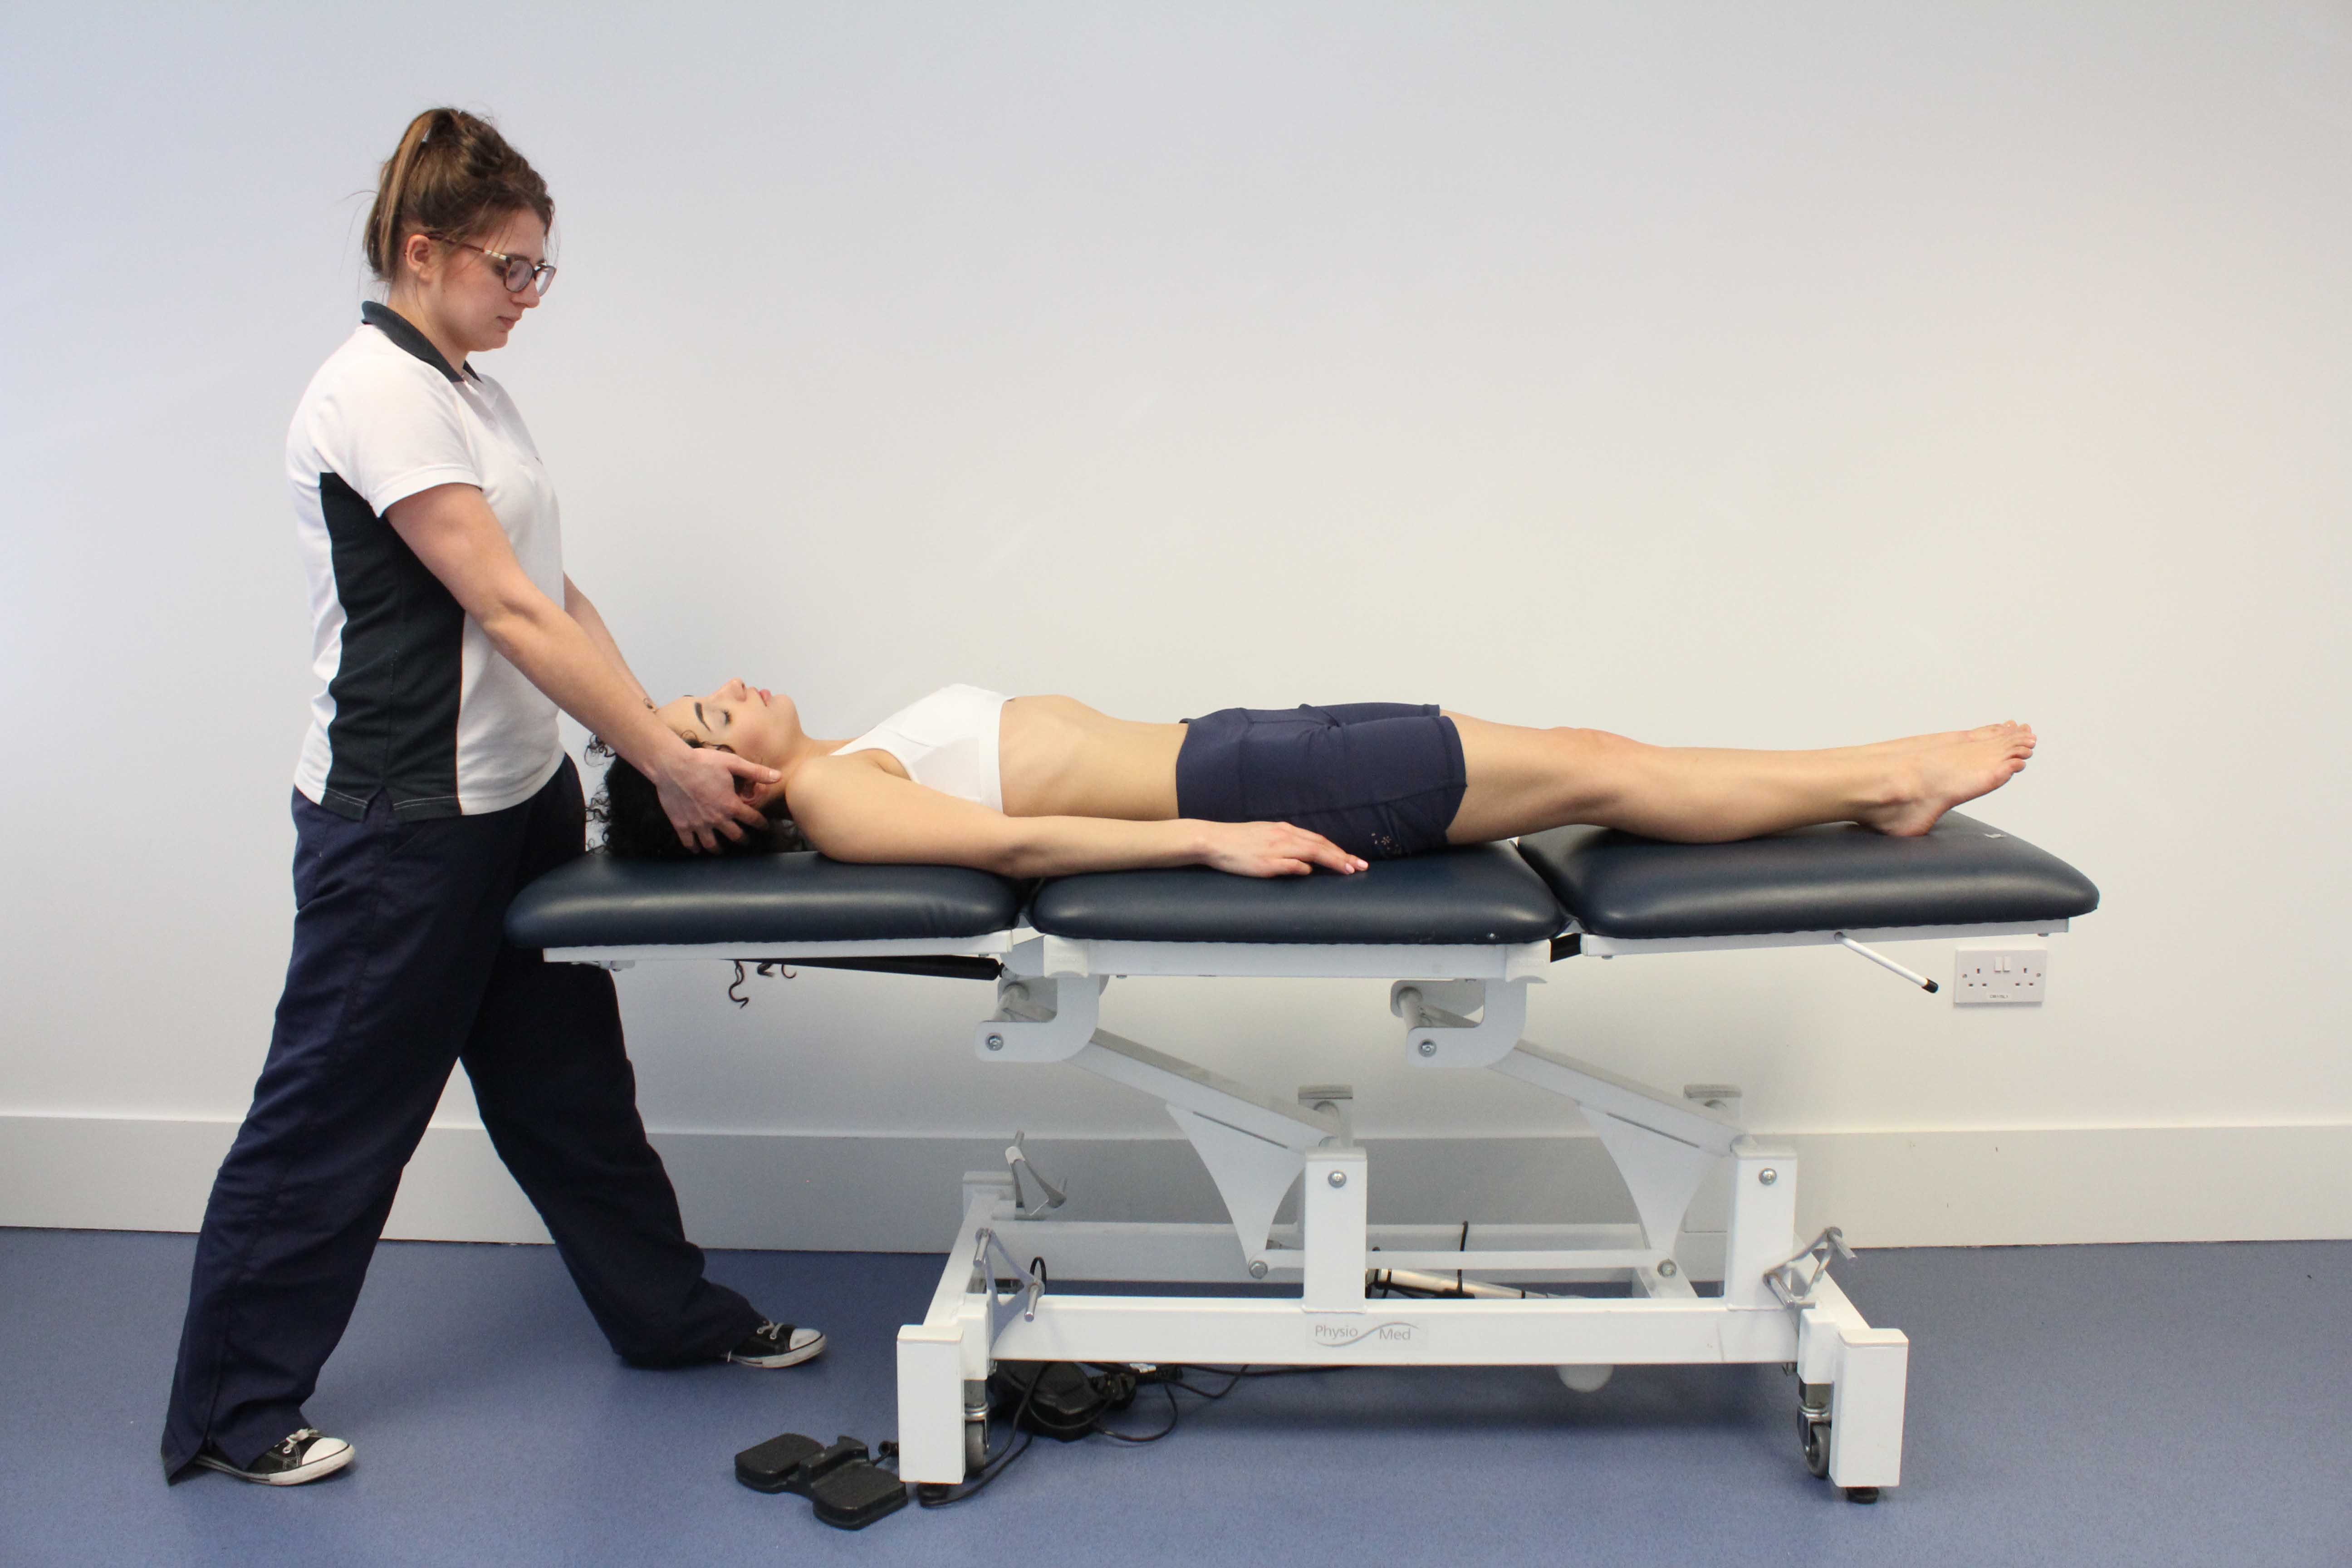 Passive stretches and mobilisations by a physiotherapist of muscle and cervical vertebrea to relieve stiffness and pain